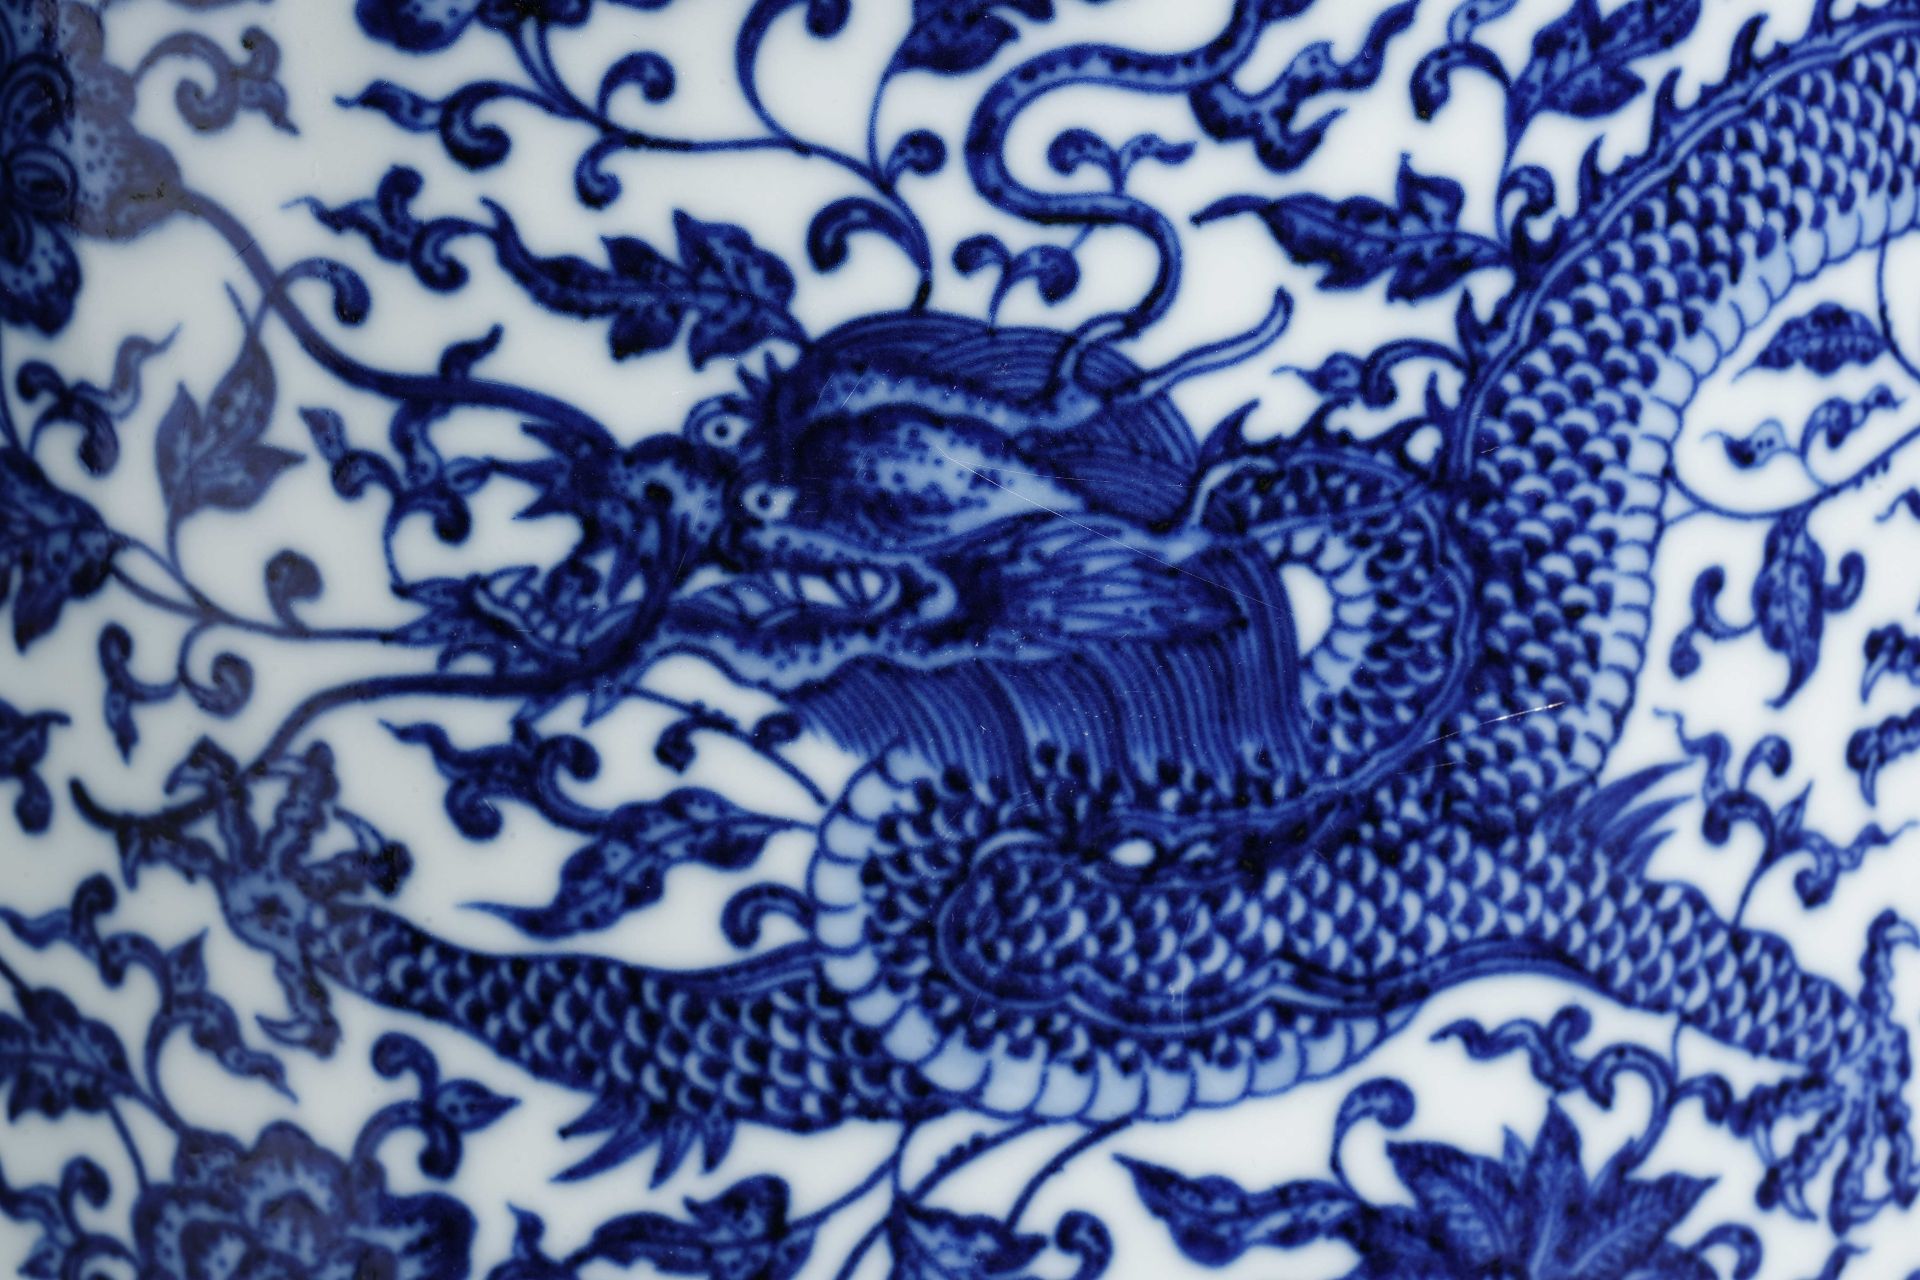 A Blue and White Dragon Vase - Image 8 of 14